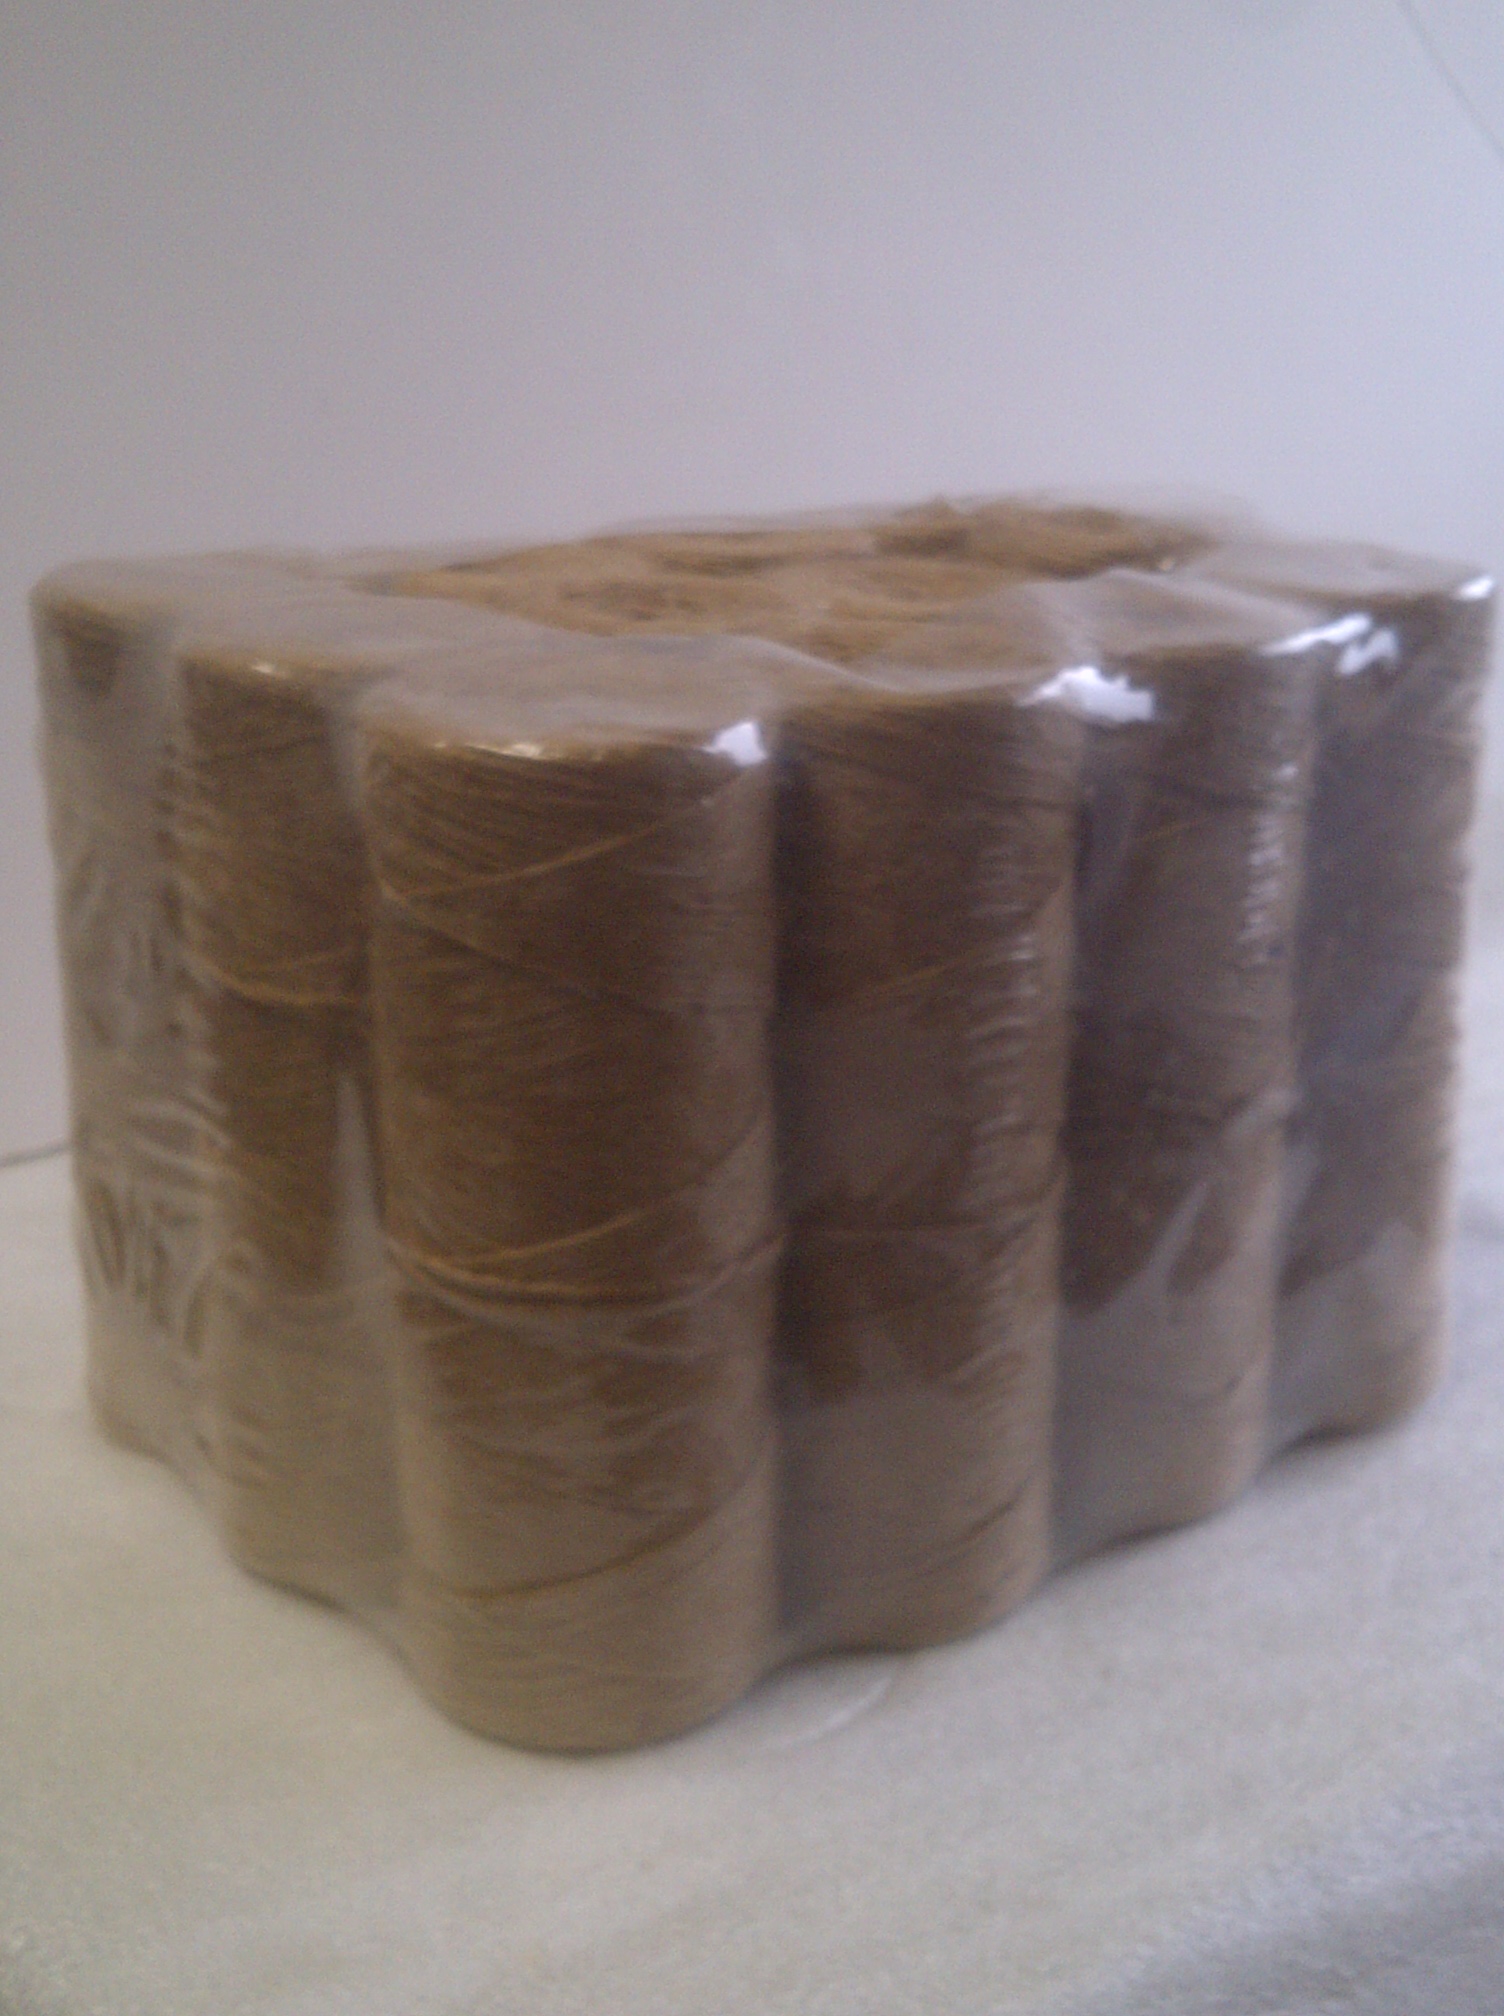 4-Ply 110lb tensile Strength Jute Twine - Click Image to Close